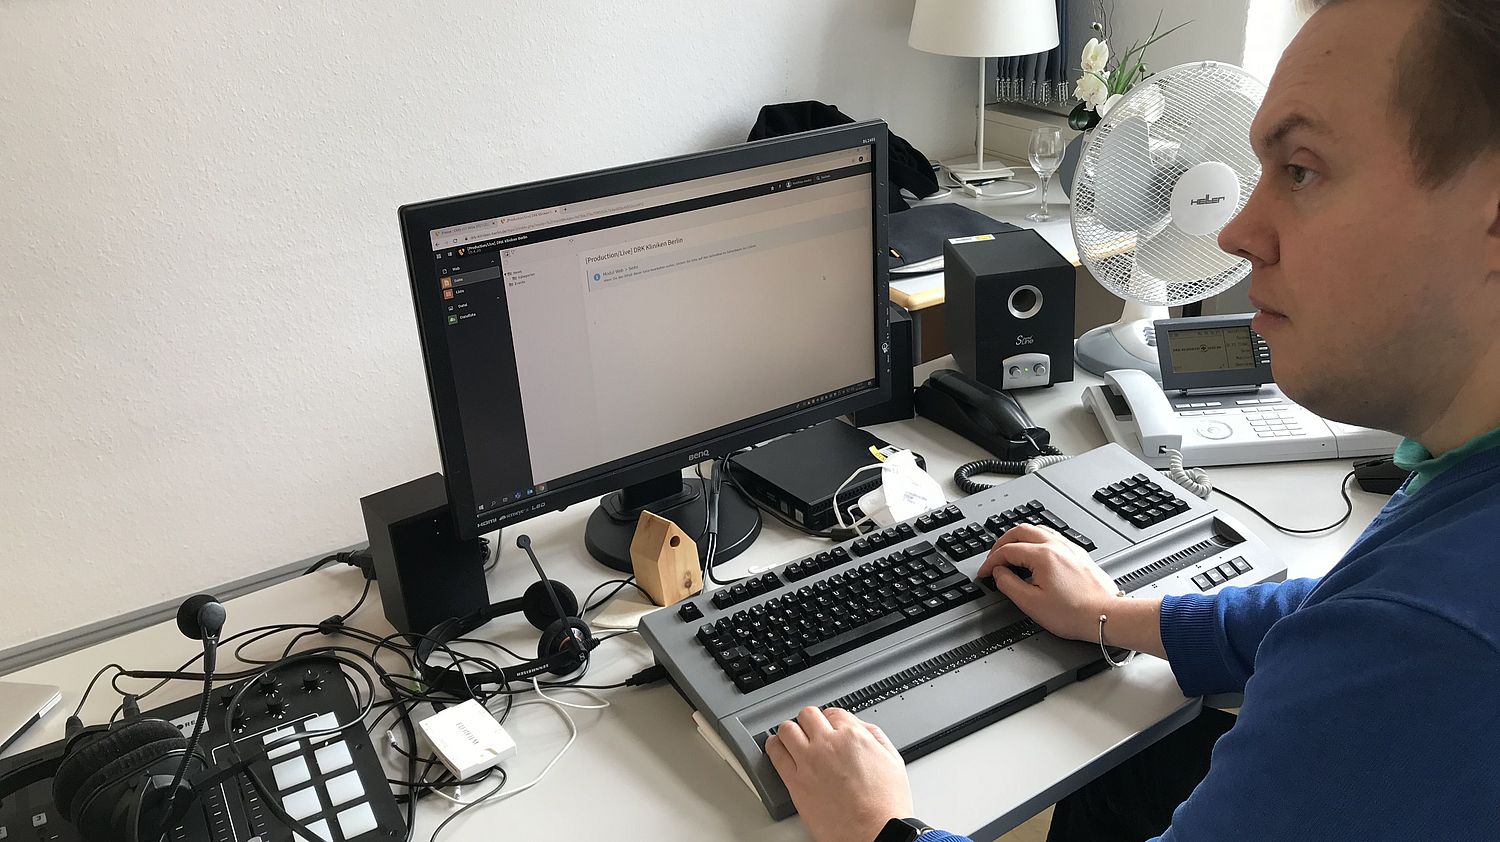 Matthias Henke sitting at a desk with a monitor and a keyboard with built-in Braille display. The monitor shows the TYPO3 Backend.